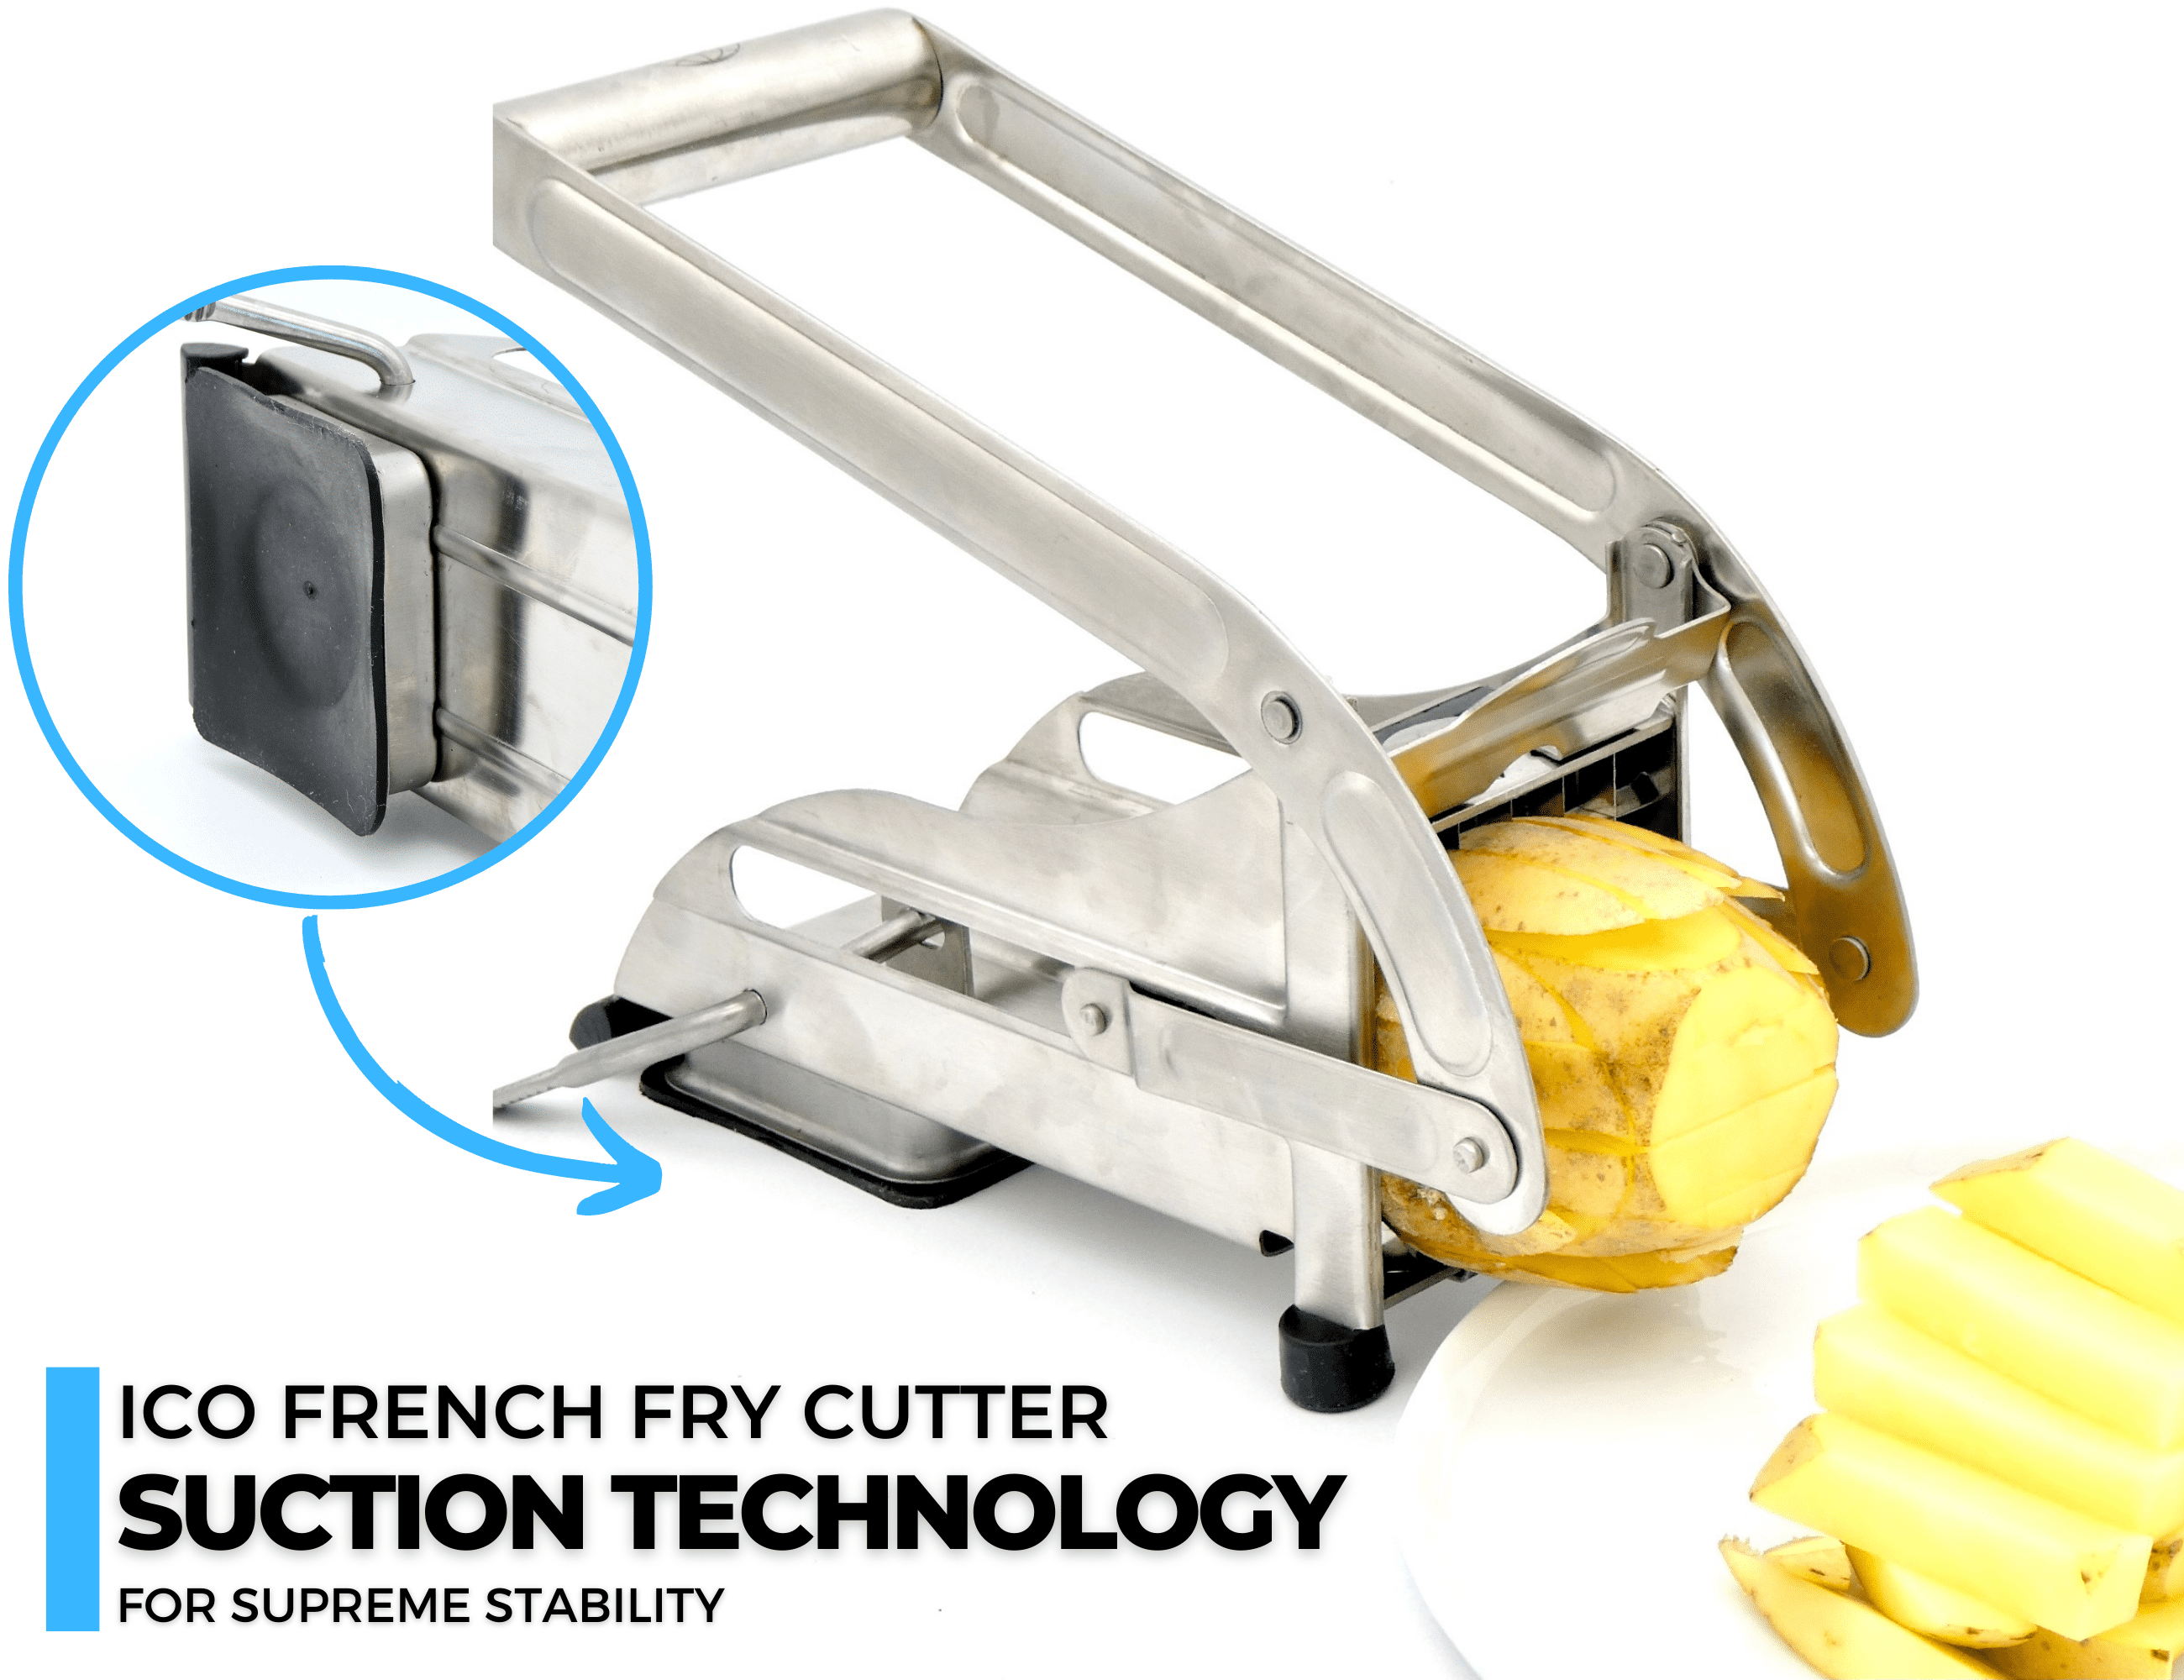 FemPot: More Stylish Functional Electric French Fries Cutter by